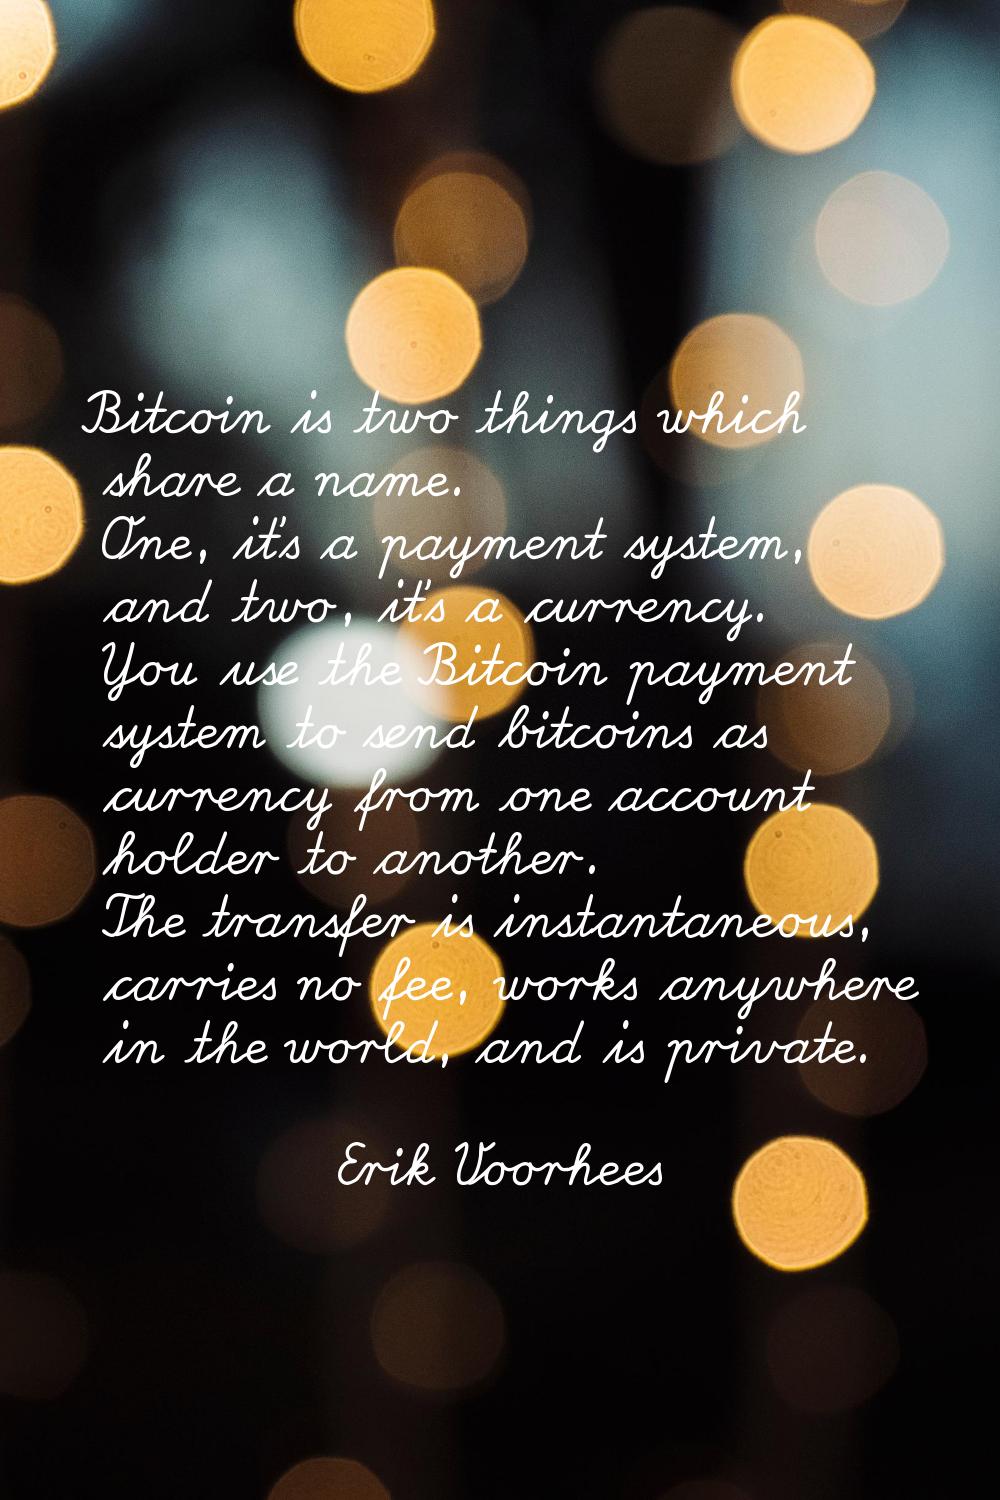 Bitcoin is two things which share a name. One, it's a payment system, and two, it's a currency. You